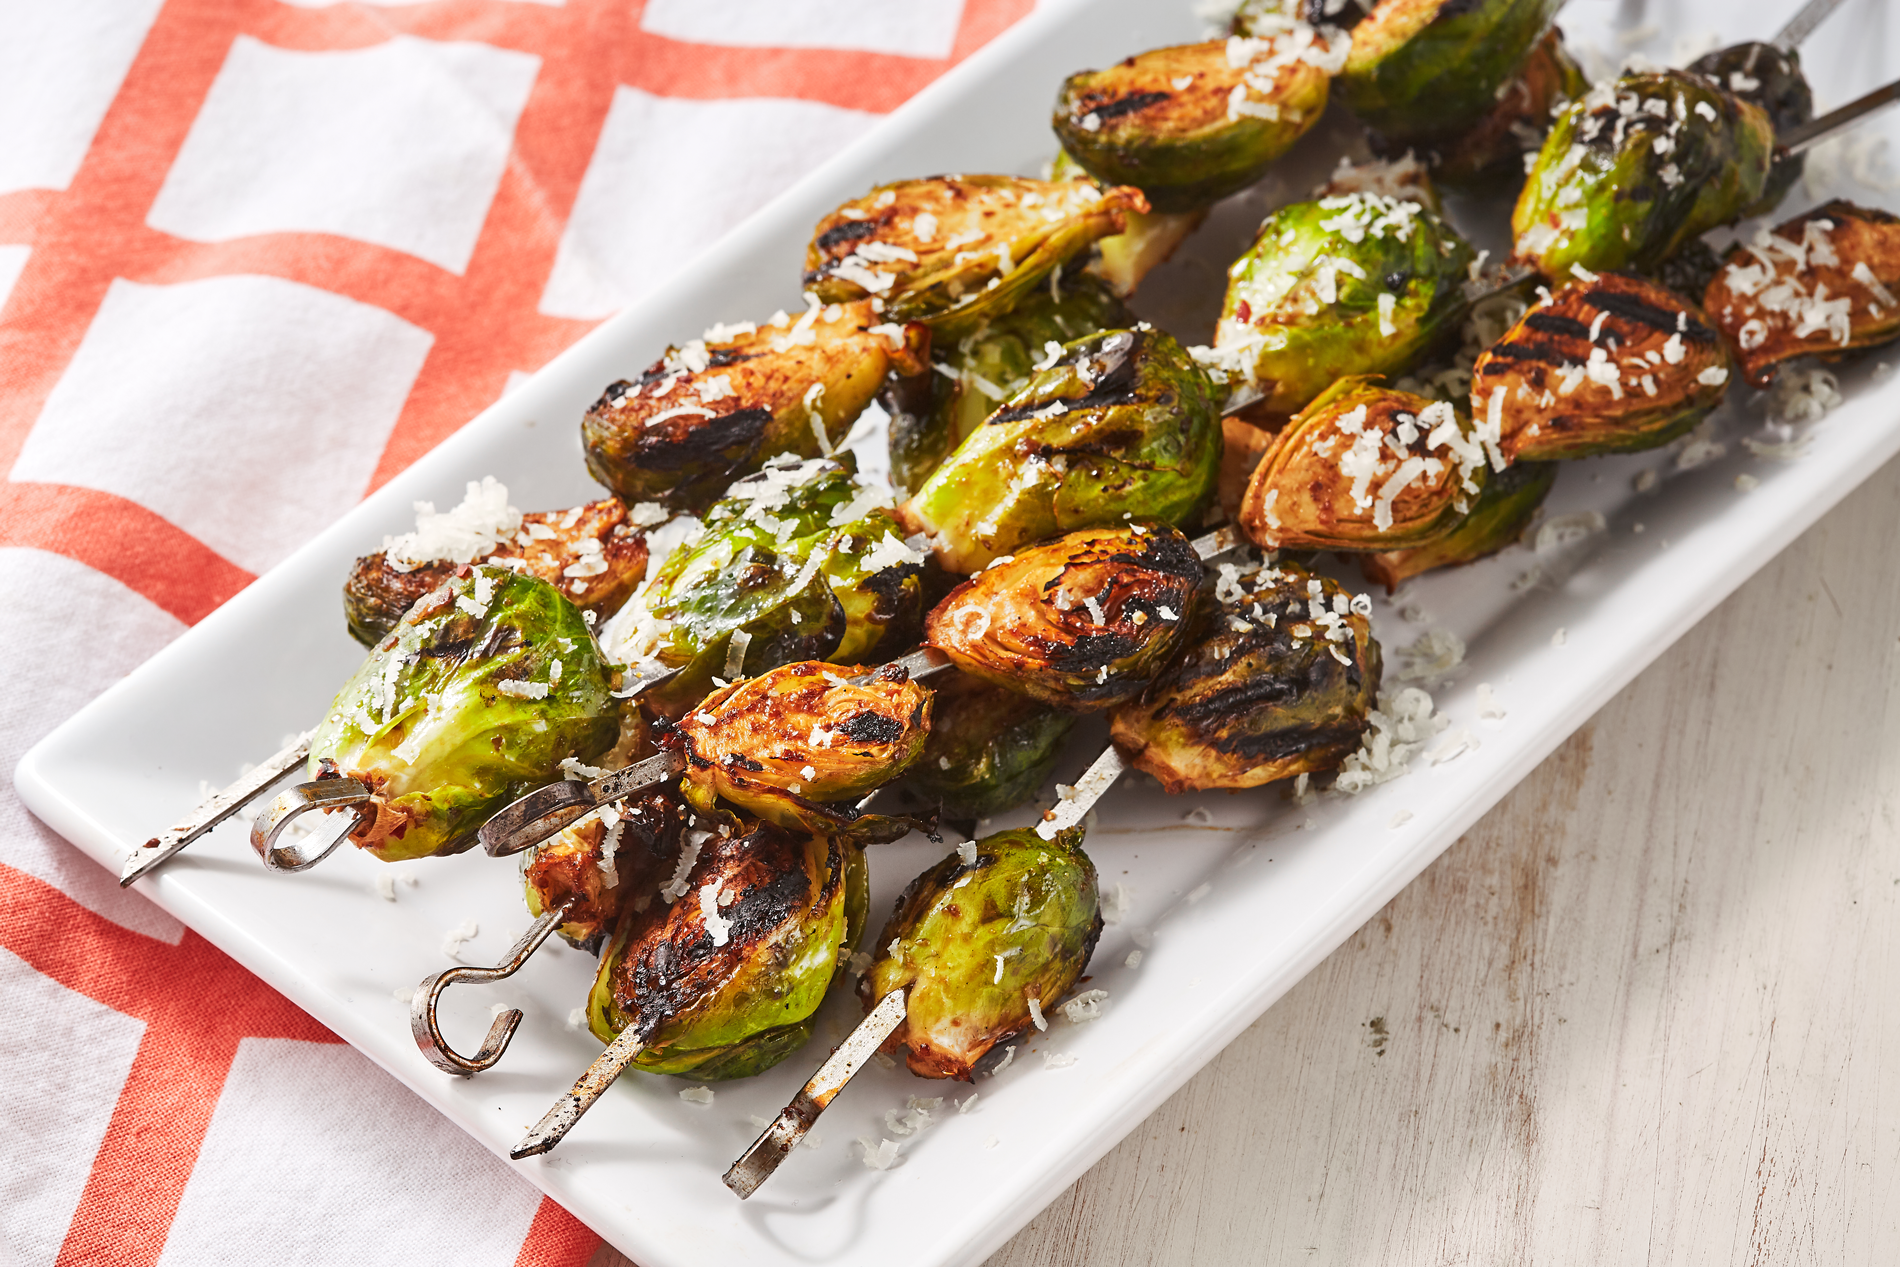 Bonefish Grill Brussel Sprouts Recipe